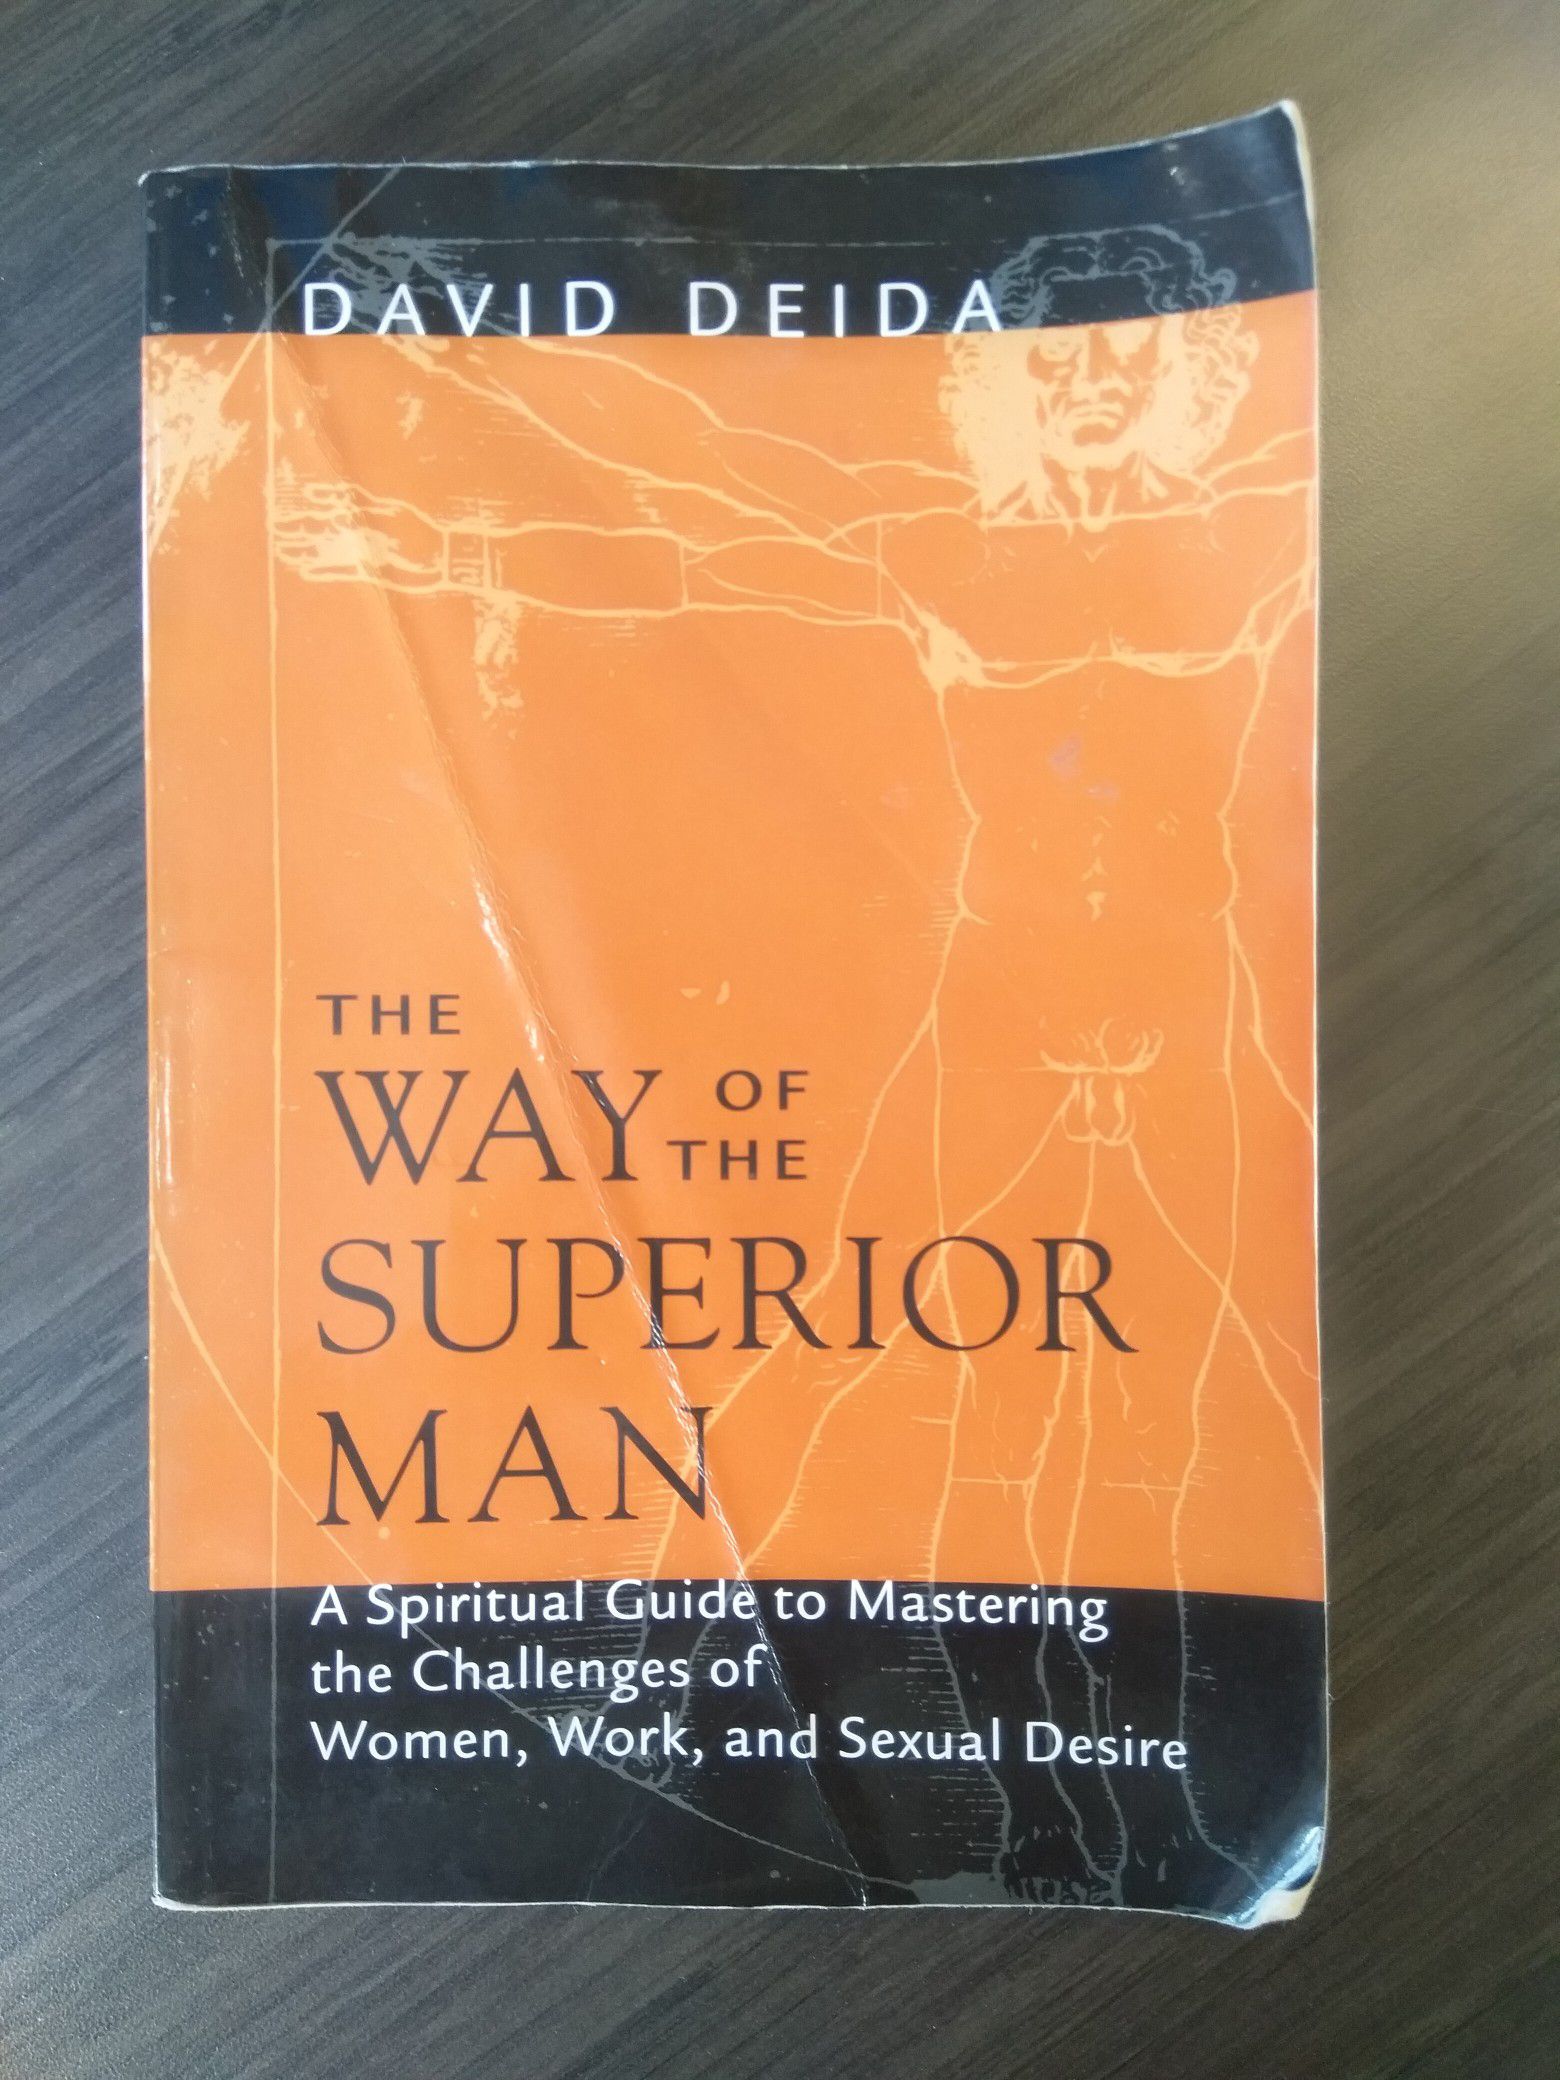 The Way of the Superior Man - A Spiritual Guide to Mastering the Challenges of Women, Work, and Sexual Desire By David Deida